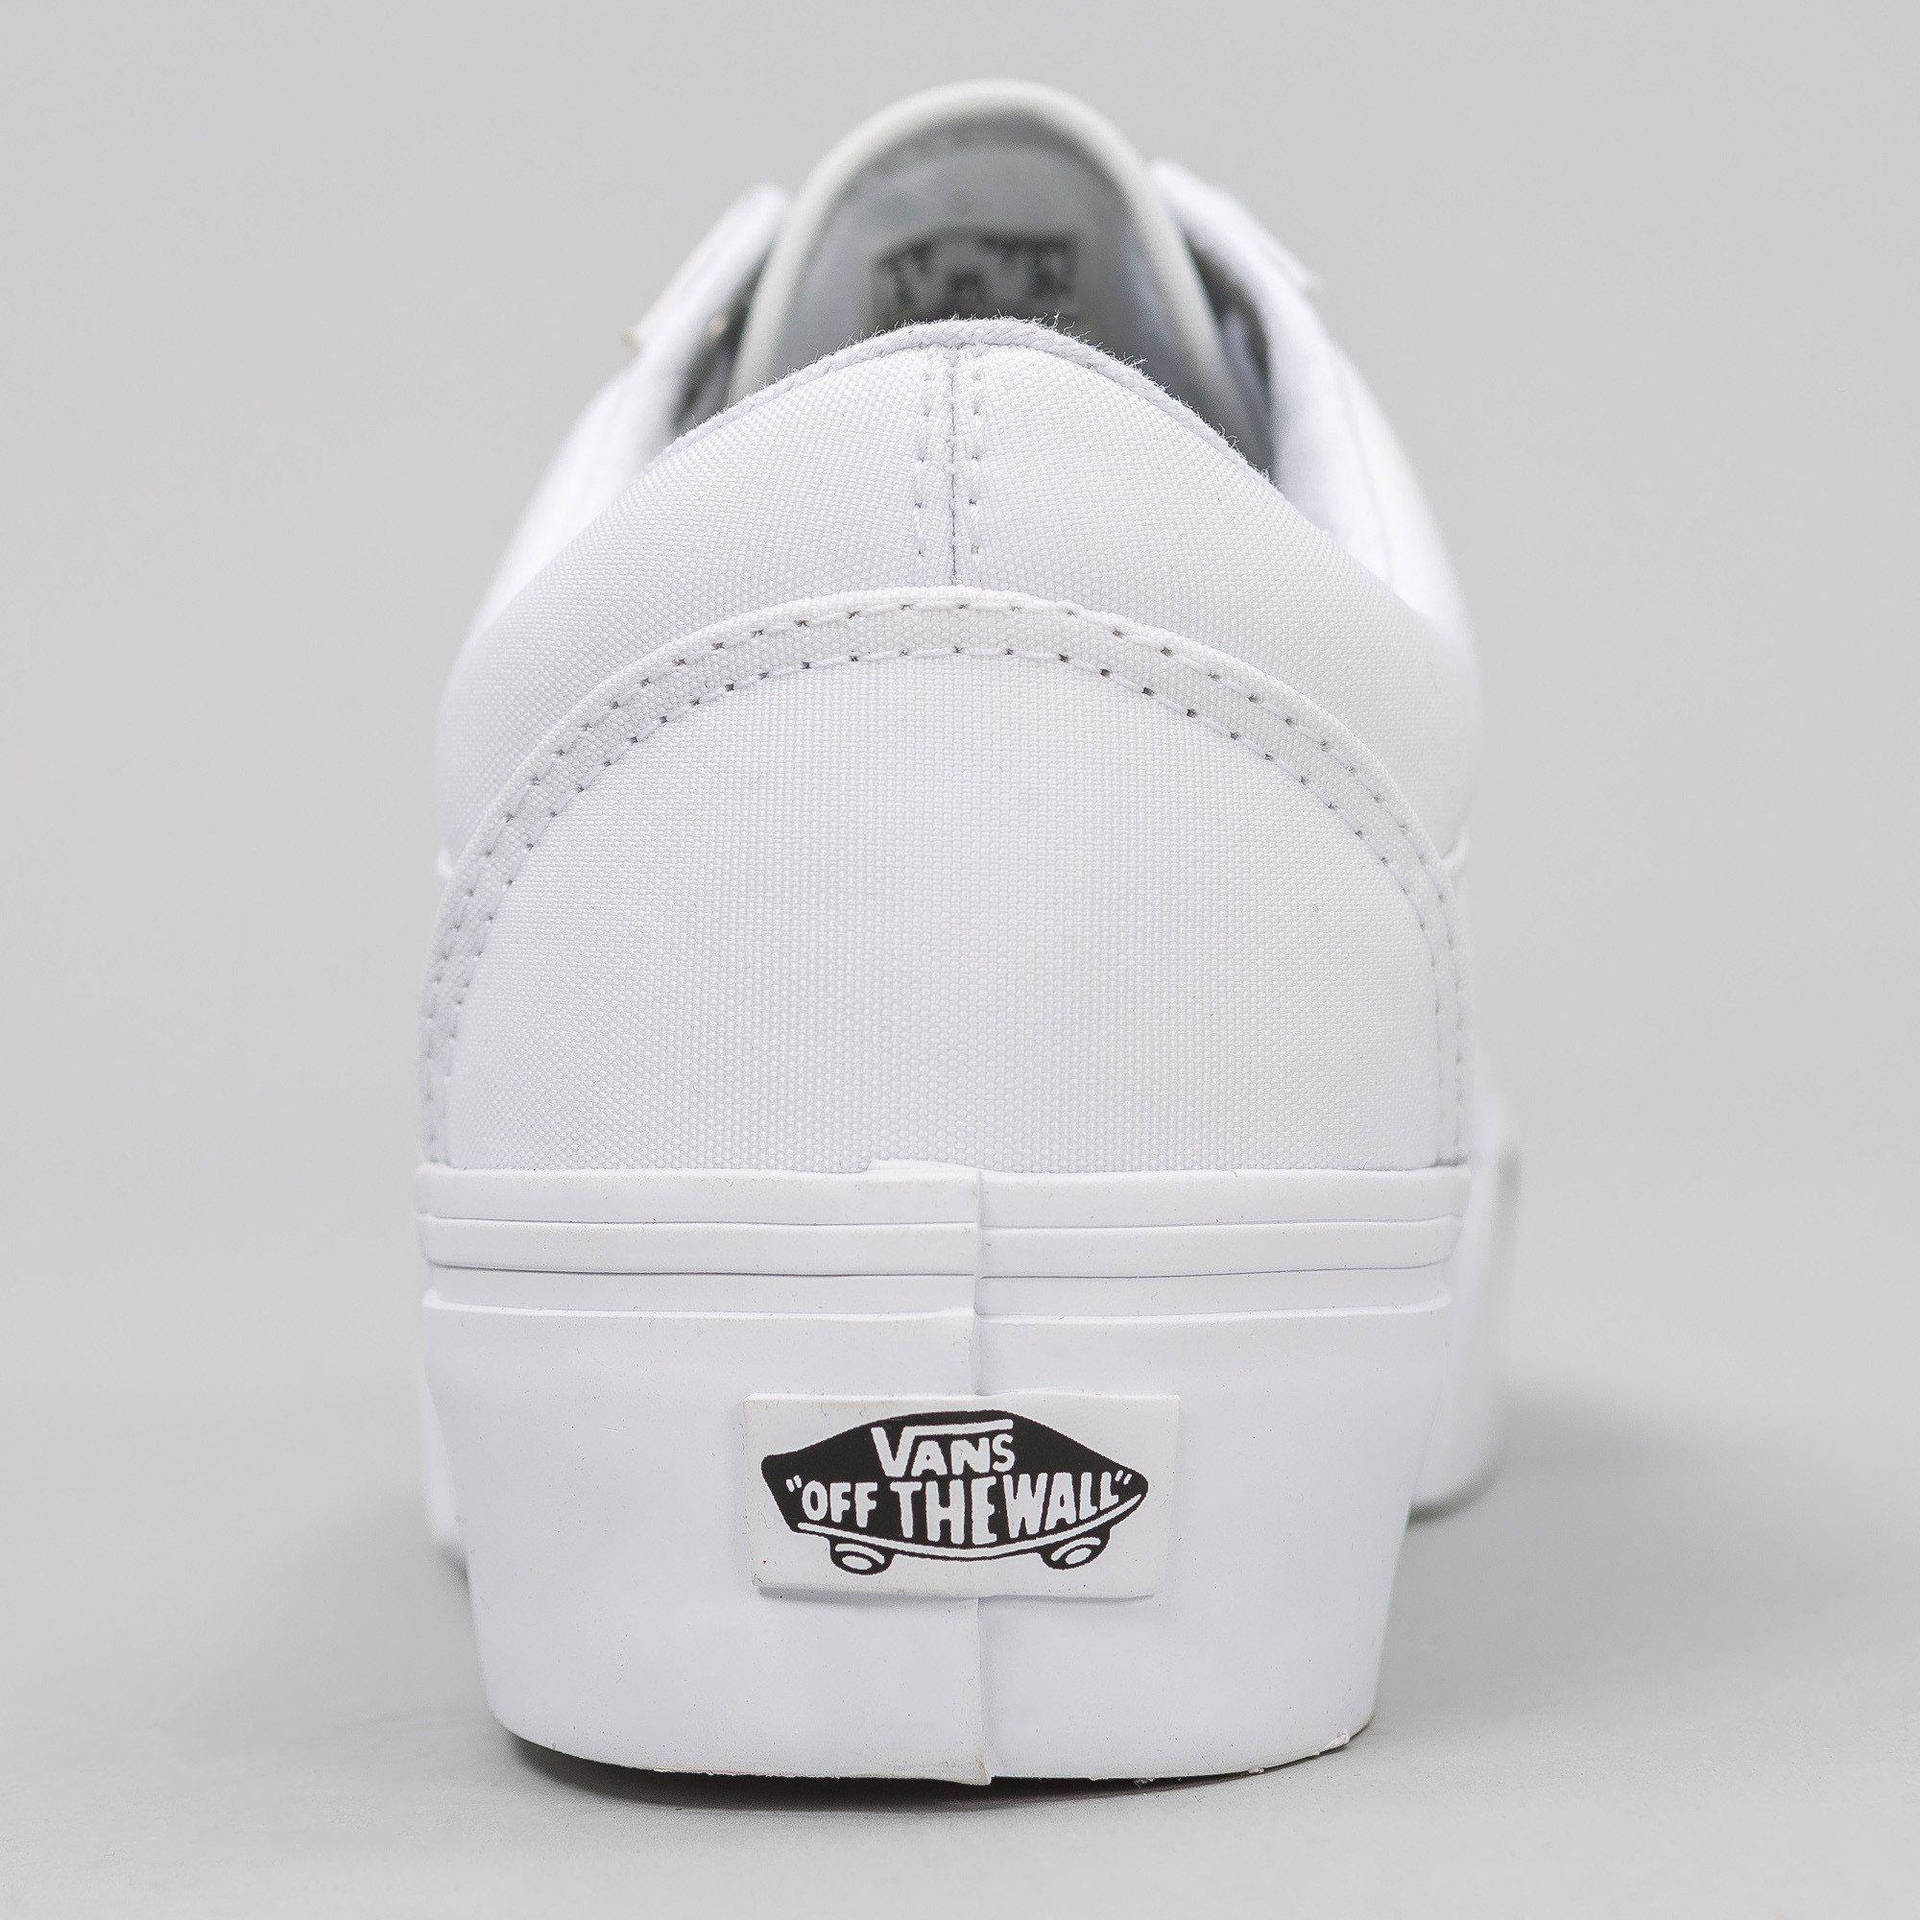 Vans Off The Wall White Shoe